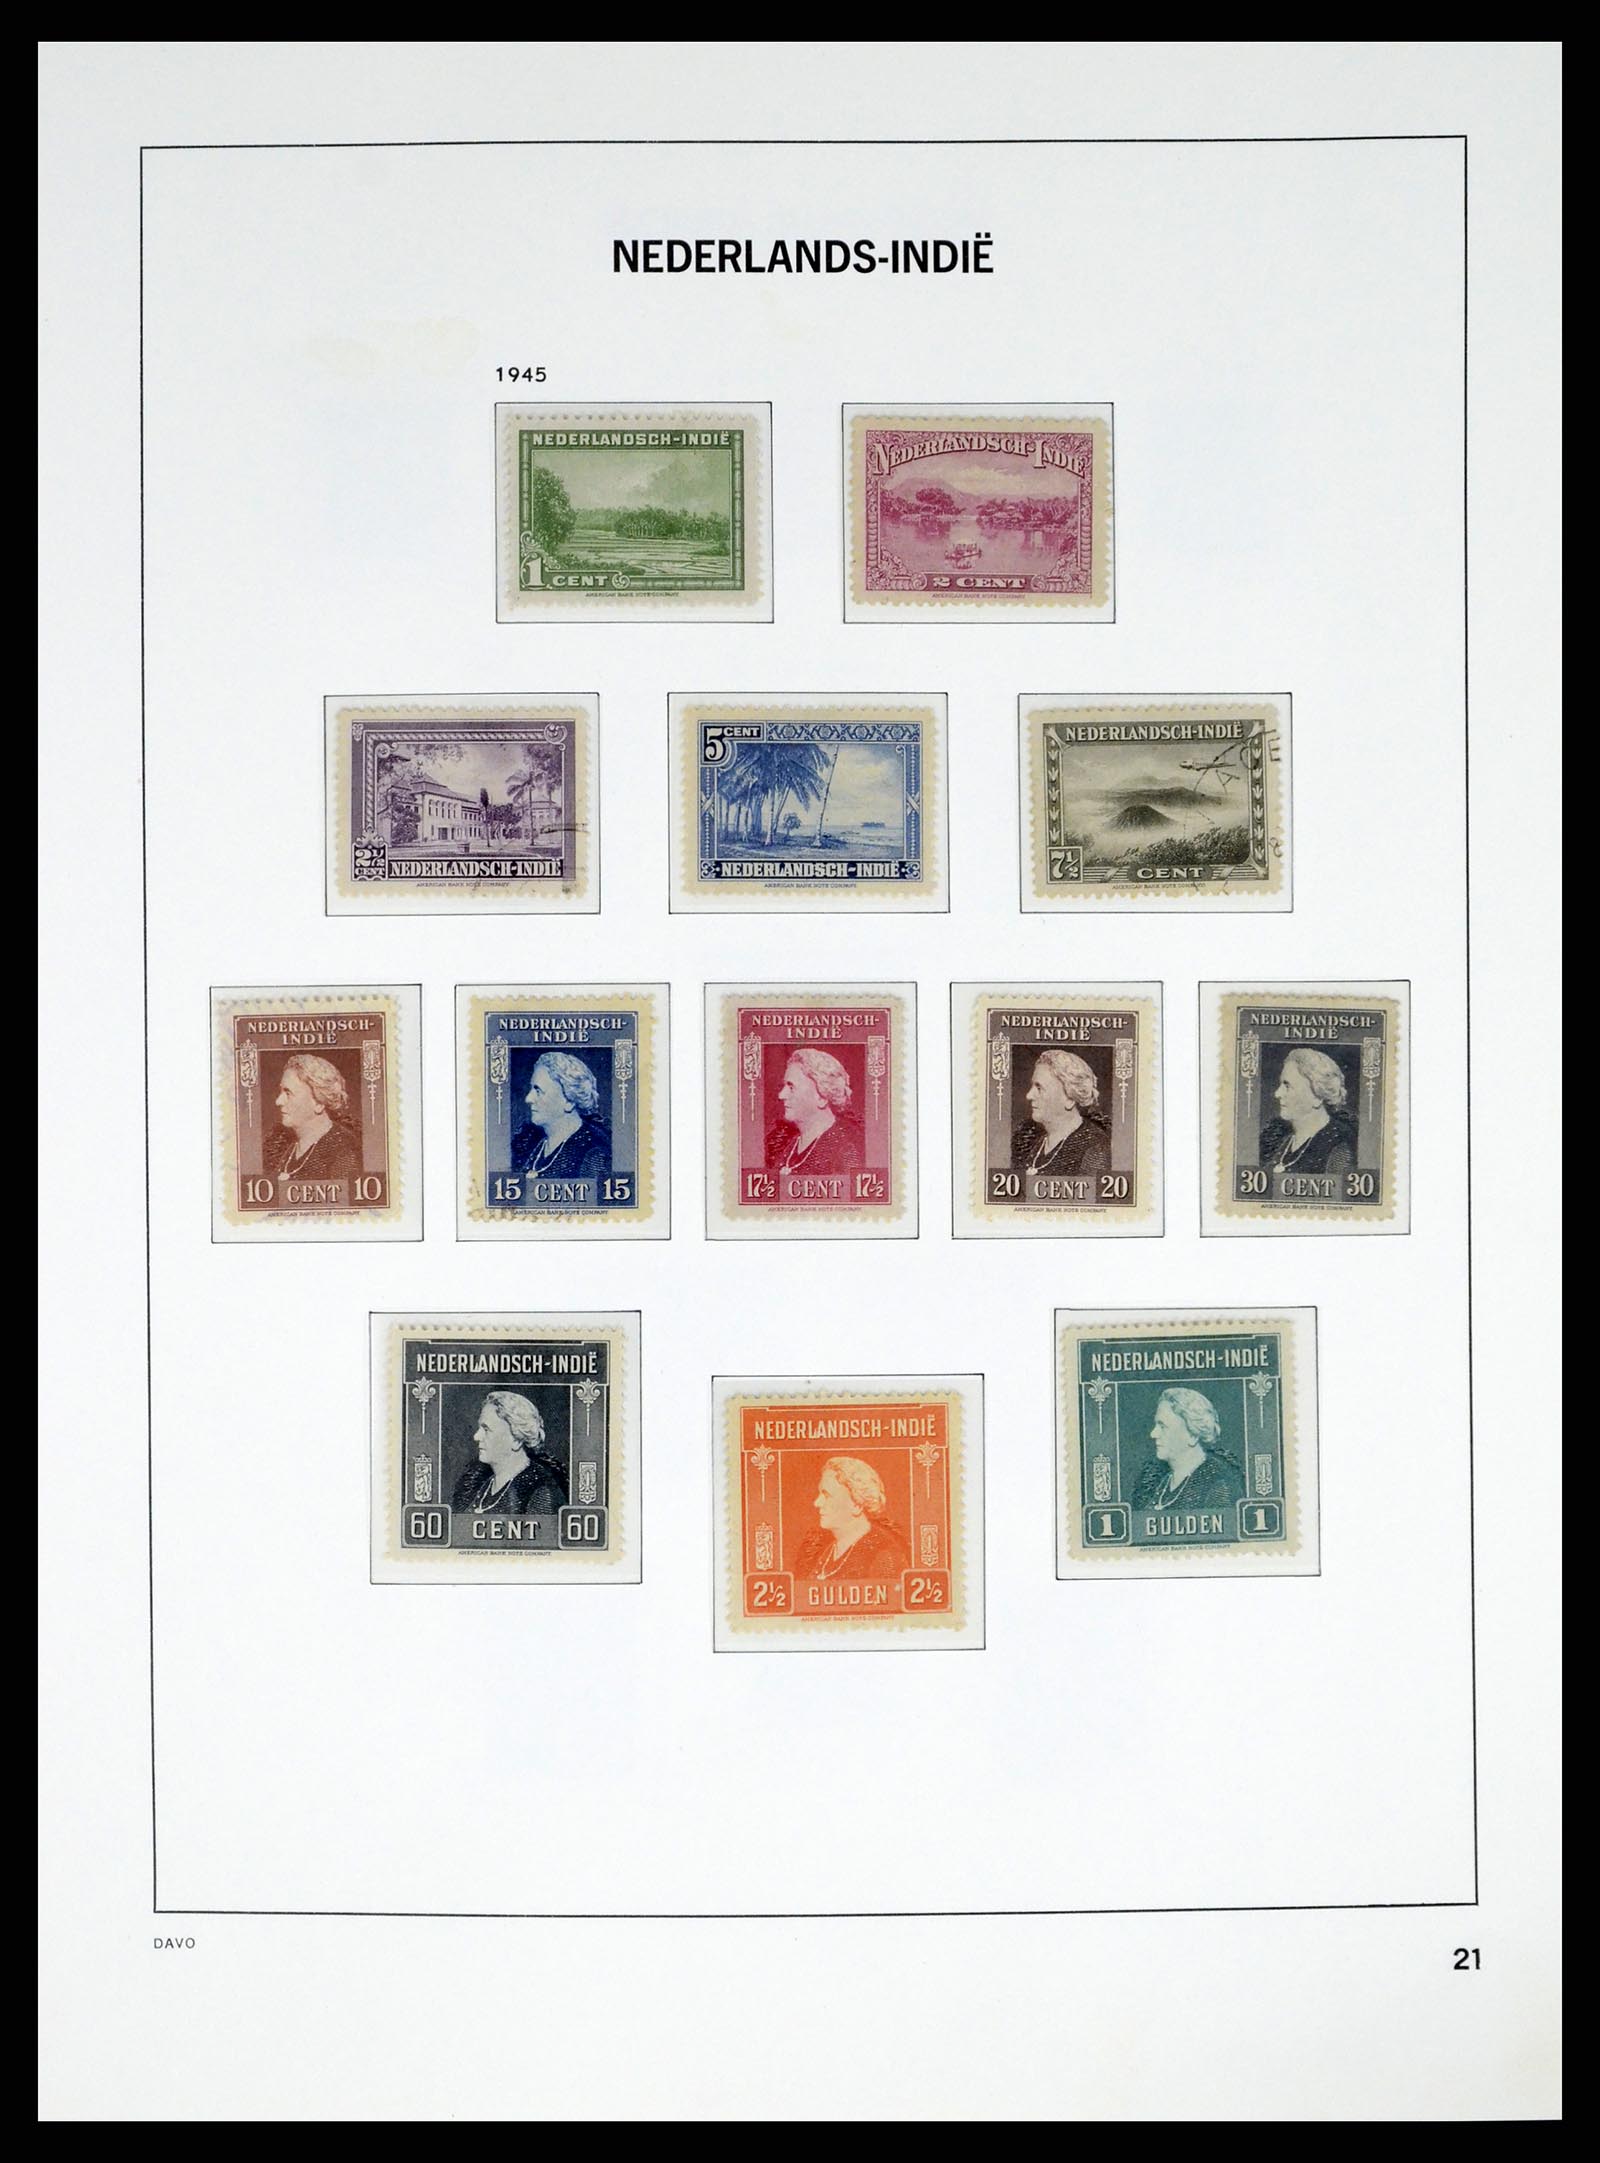 37332 021 - Stamp collection 37332 Dutch East Indies 1864-1949.